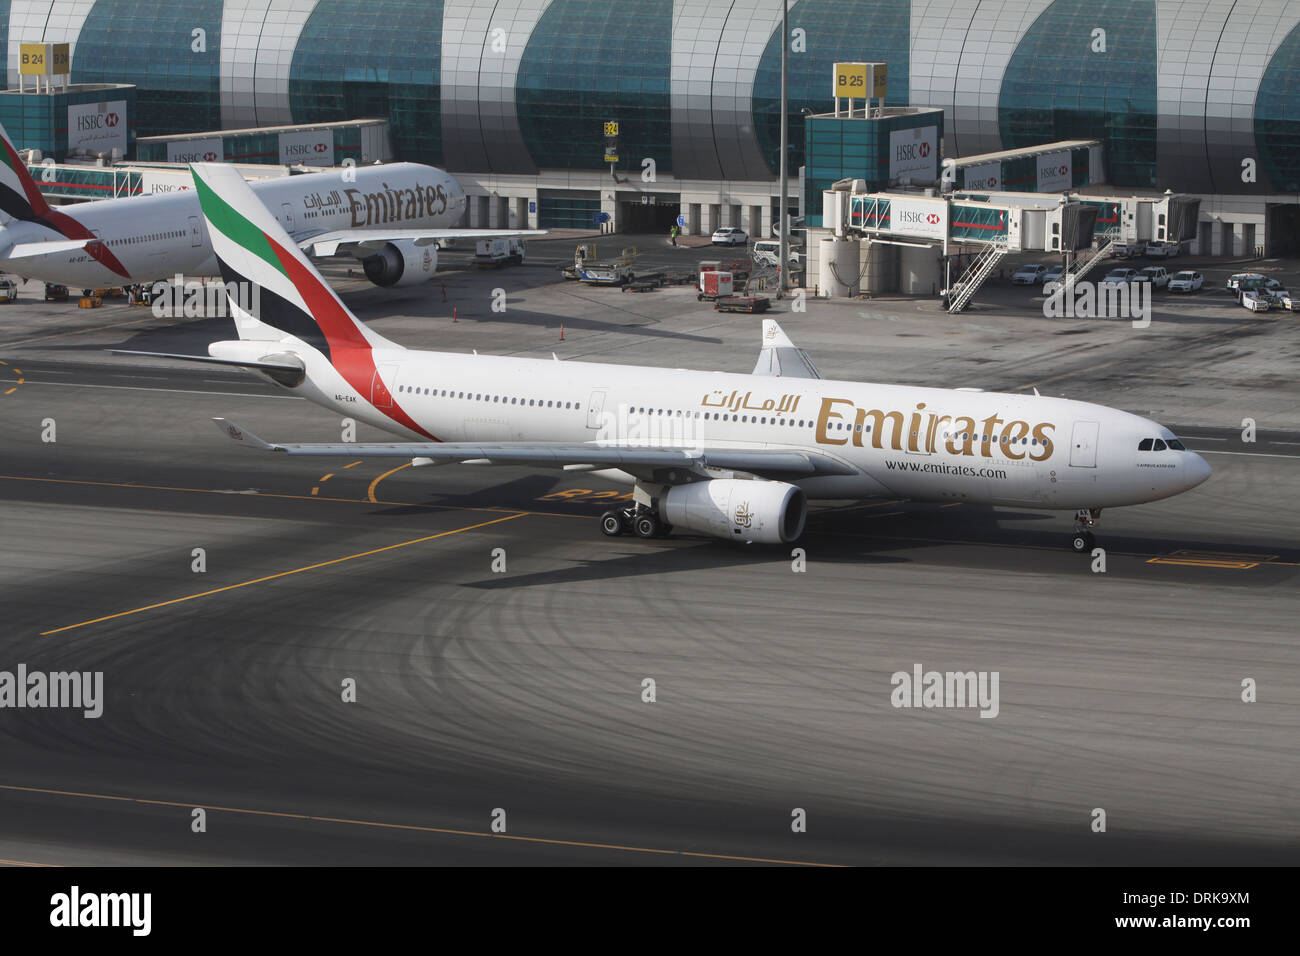 Emirates Airlines Airbus A330-200 taxiing out for departure from Dubai International Airport, UAE Stock Photo